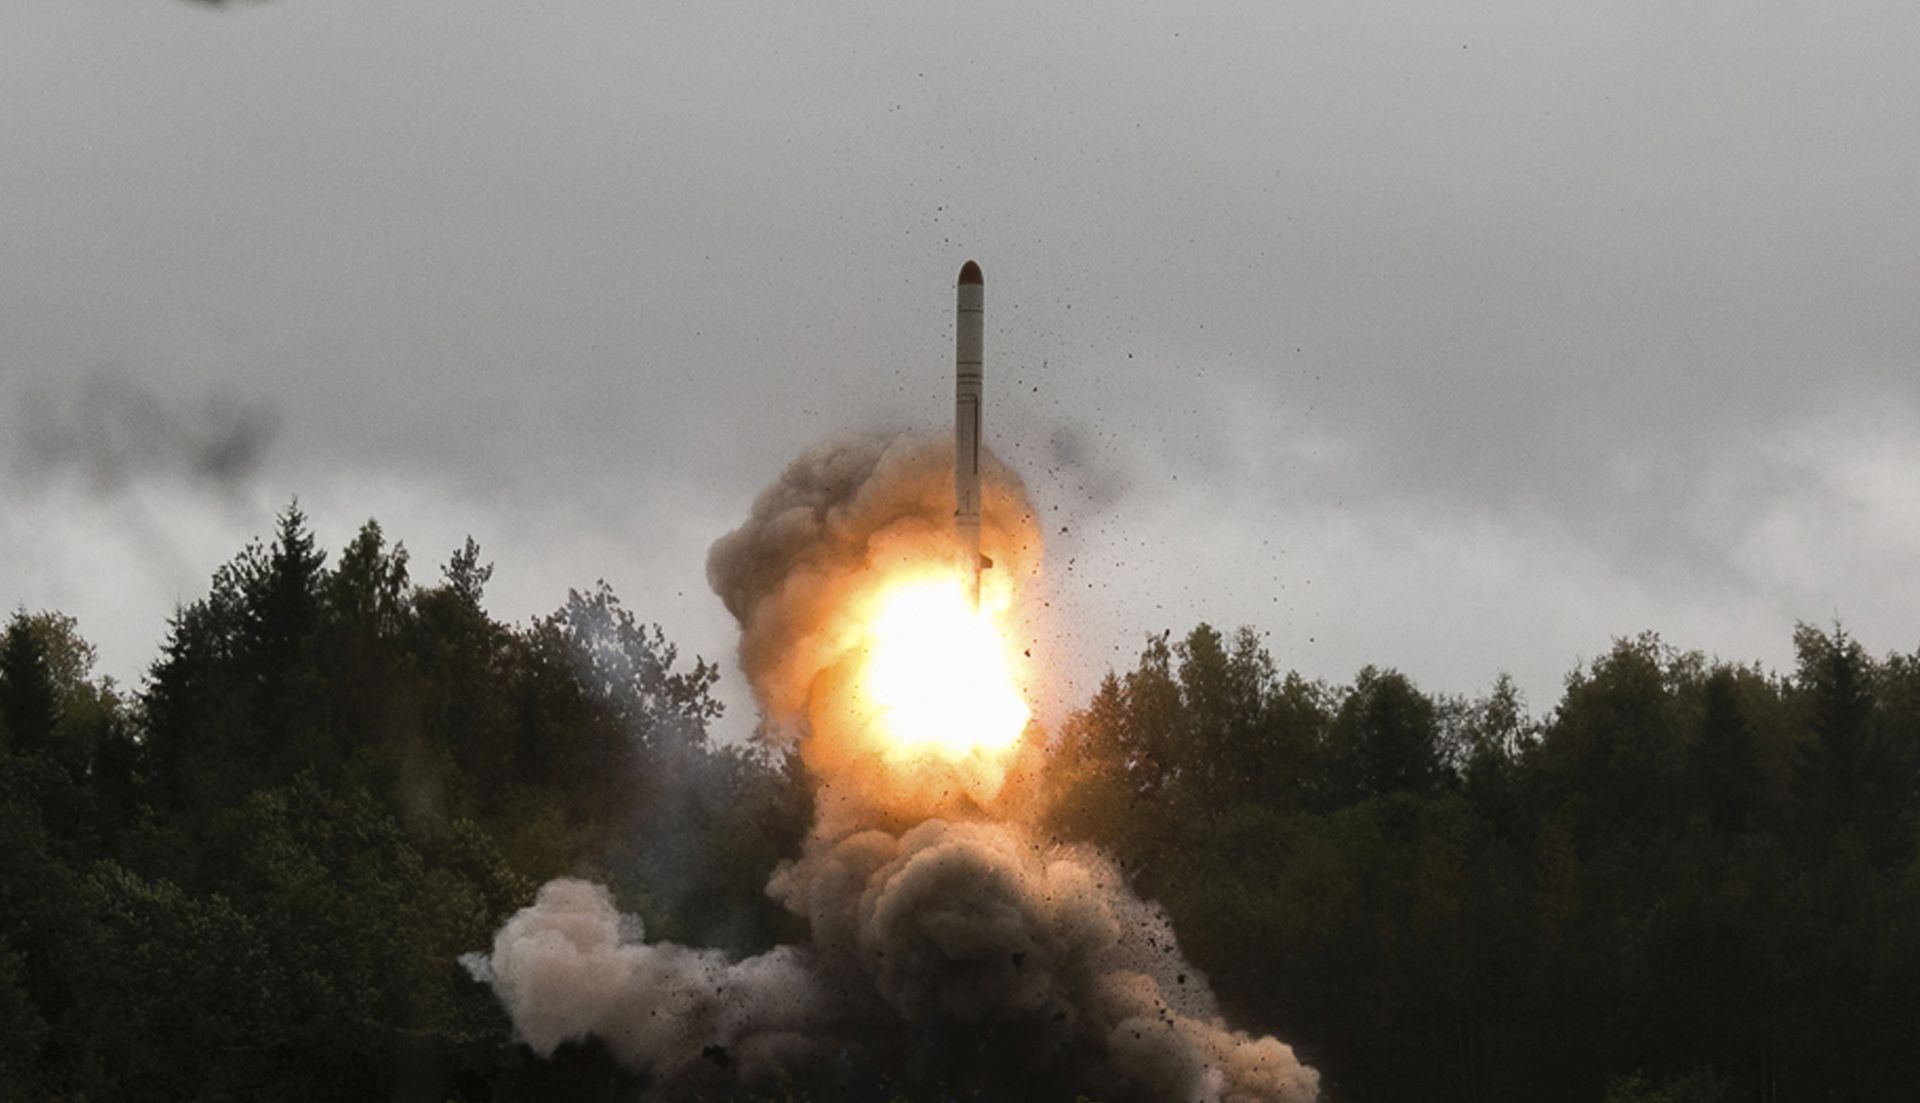 epa07108045 (FILE) - A handout photo made available by the Russian Defence Ministry on 19 September 2017 shows Russian tactic missile Iskander -M during Zapad 2017 military exercises on Luga range in St. Petersburg region, Russia, 18 September 2017 (reissued 20 October 2018). According to media reports, the Trump administration has told US allies that it wants to withdraw from the landmark Reagan-era Intermediate-range Nuclear Forces Treaty, or INF.  EPA/KONSTANTIN ALYSH / DEFENCE MINISTRY HANDOUT HANDOUT       HANDOUT EDITORIAL USE ONLY/NO SALES HANDOUT EDITORIAL USE ONLY/NO SALES